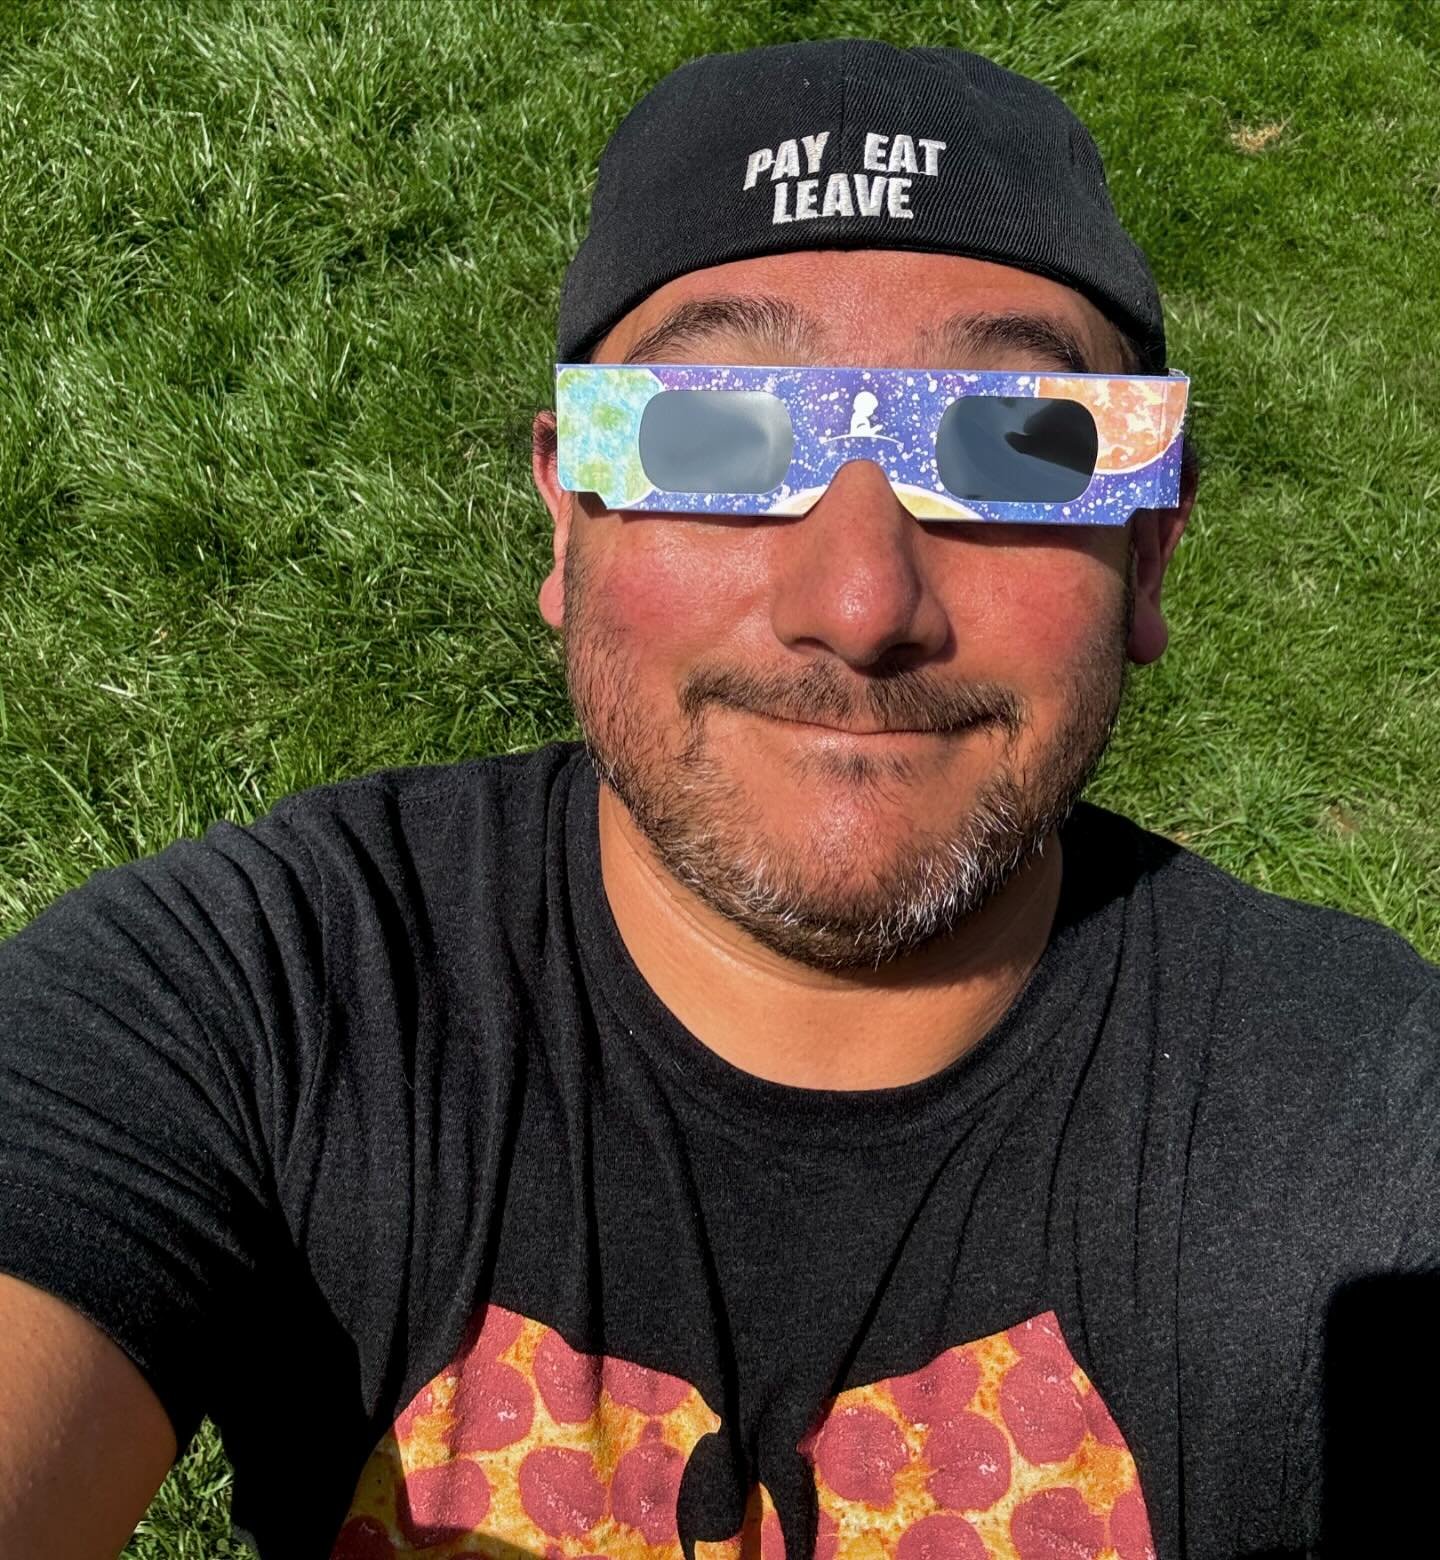 PSA: don&rsquo;t forget to wear your eclipse glasses! Swipe to see what could happen if you don&rsquo;t 😱

It&rsquo;ll be hard to see your pizza if your retinas burn up.. just saying. 

(#throwback to the 2017 partial eclipse when Jason was too cool